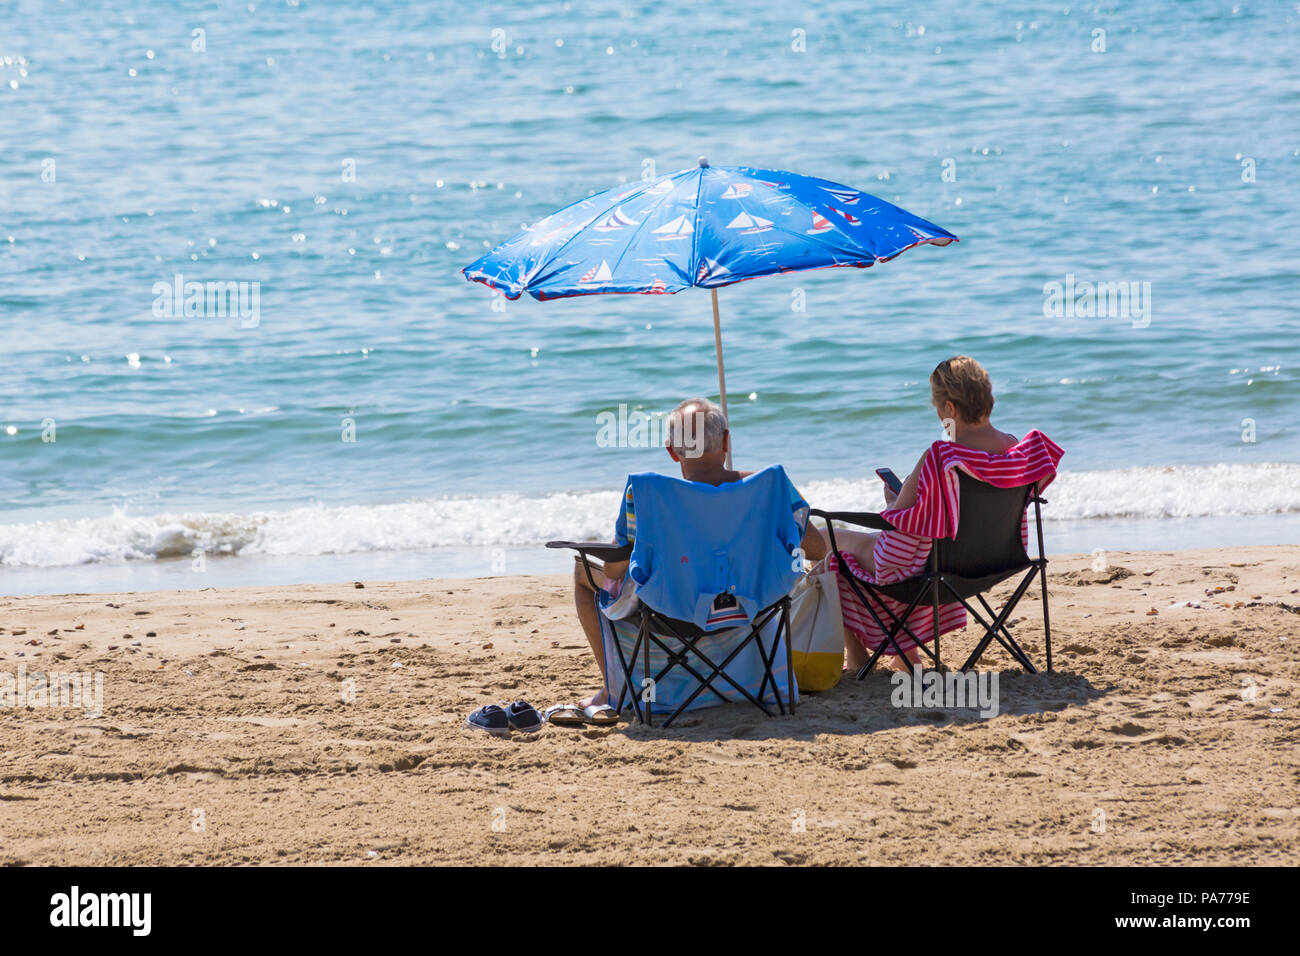 Bournemouth, Dorset, UK. 21st July 2018. UK weather: hot and sunny at Bournemouth beaches, as sunseekers head to the seaside to soak up the sun at the start of the summer holidays. mature couple relaxing in chairs under nautical themed parasol at the seashore on Bournemouth beach. Credit: Carolyn Jenkins/Alamy Live News Stock Photo